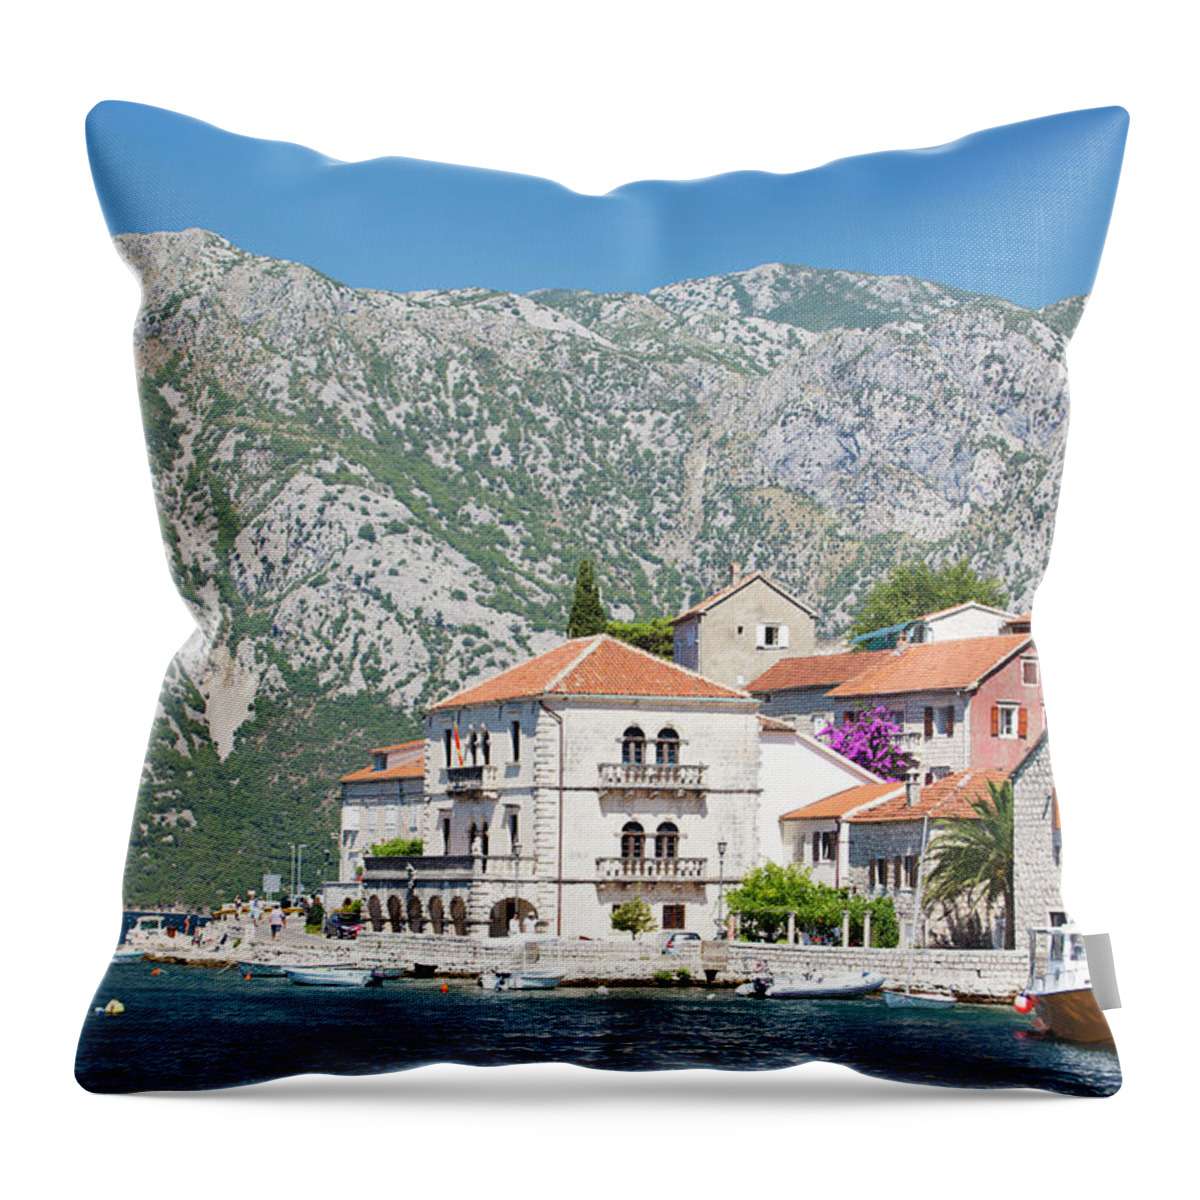 Europe Throw Pillow featuring the photograph The Town Of Perast, The Bay Of Kotor by David Clapp